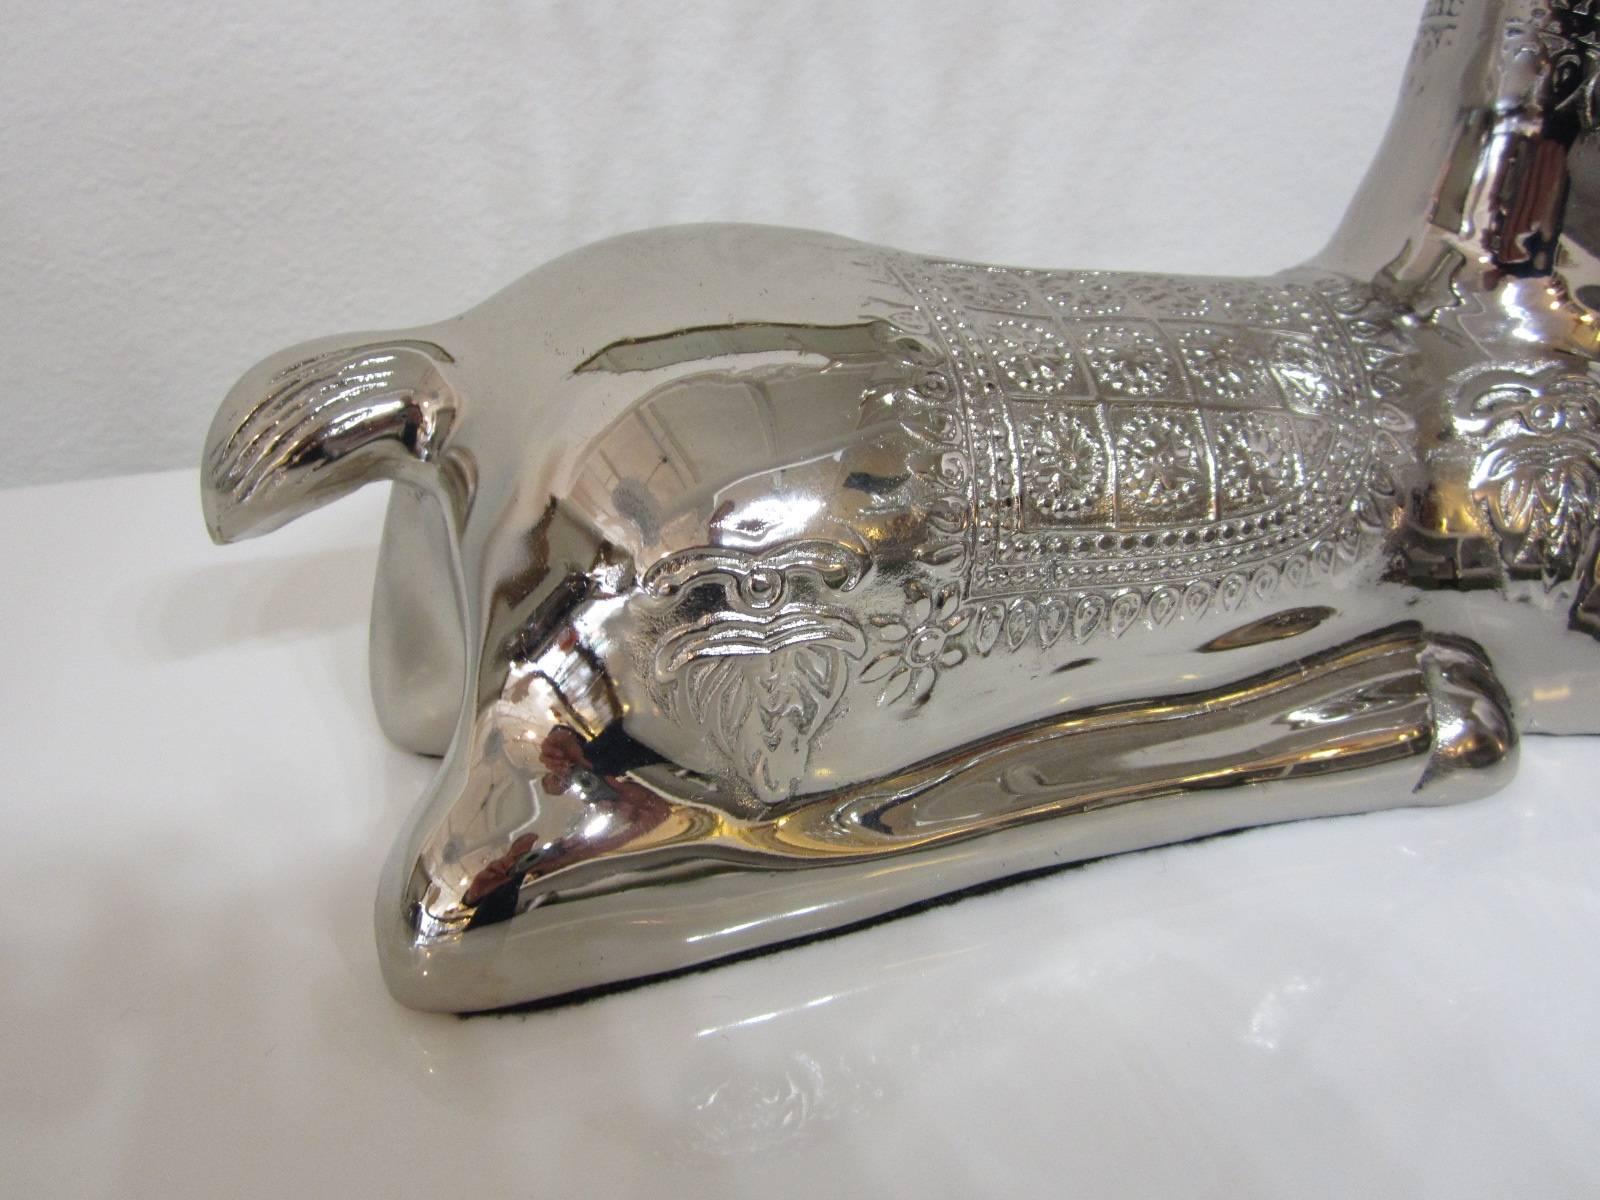 Plated Recumbent Stag Sculpture in Nickel over Brass by Sarreid